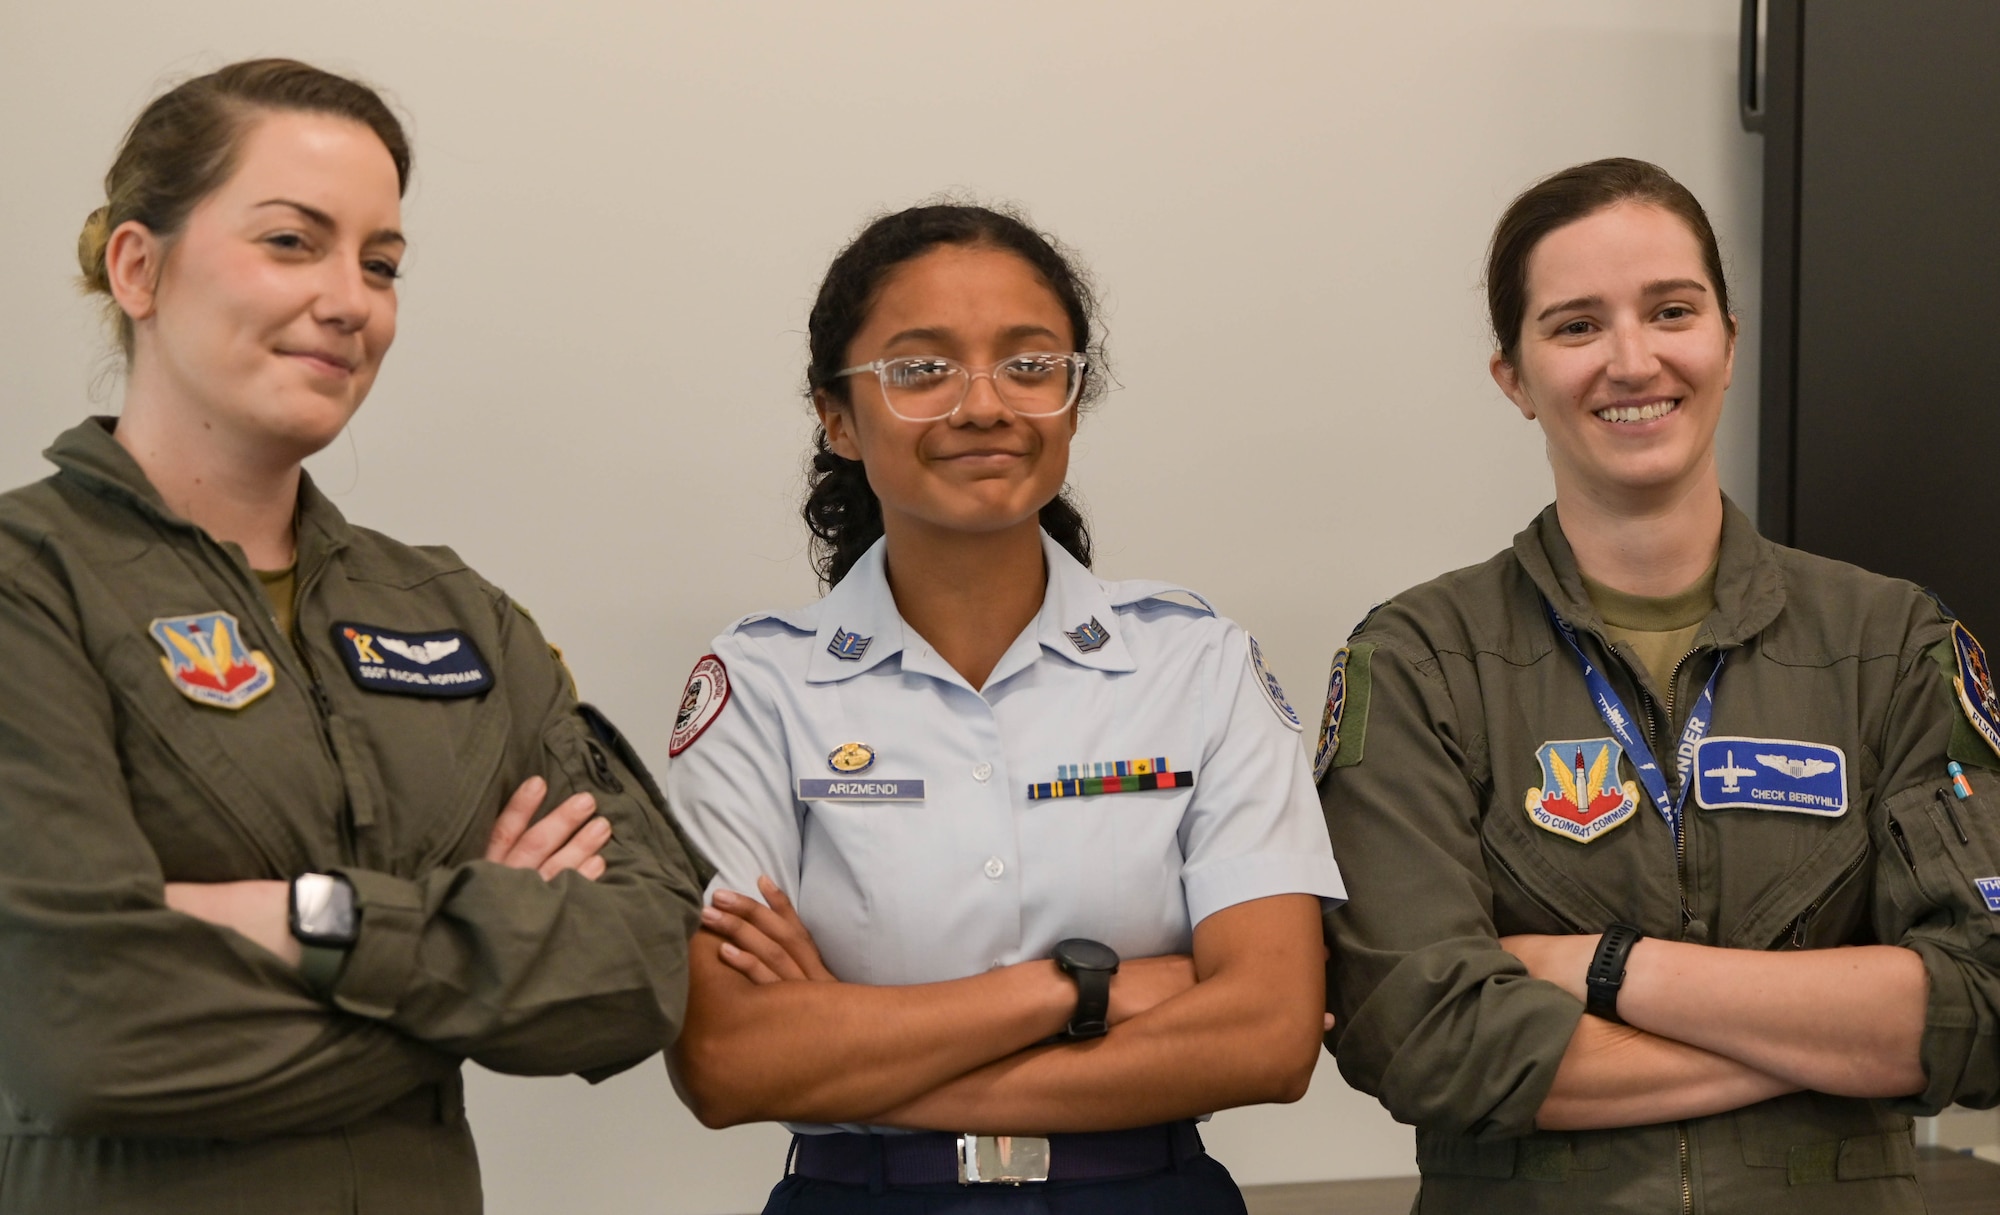 U.S. Air Force Staff Sgt. Rachel Hoffman, 71st Rescue Squadron HC-130J Combat King II loadmaster, left, stands beside an Air Force Junior ROTC cadet from Valdosta High School, middle, and Capt. Coleen Berryhill, 74th Fighter Squadron A-10C Thunderbolt II pilot, right, March 10, 2022, at Lowndes High School, Valdosta, Georgia. Students ranging from fifth grade to twelfth grade had the chance to meet ten service members and hear their various experiences in the military. (U.S. Air Force photo by Senior Airman Rebeckah Medeiros)